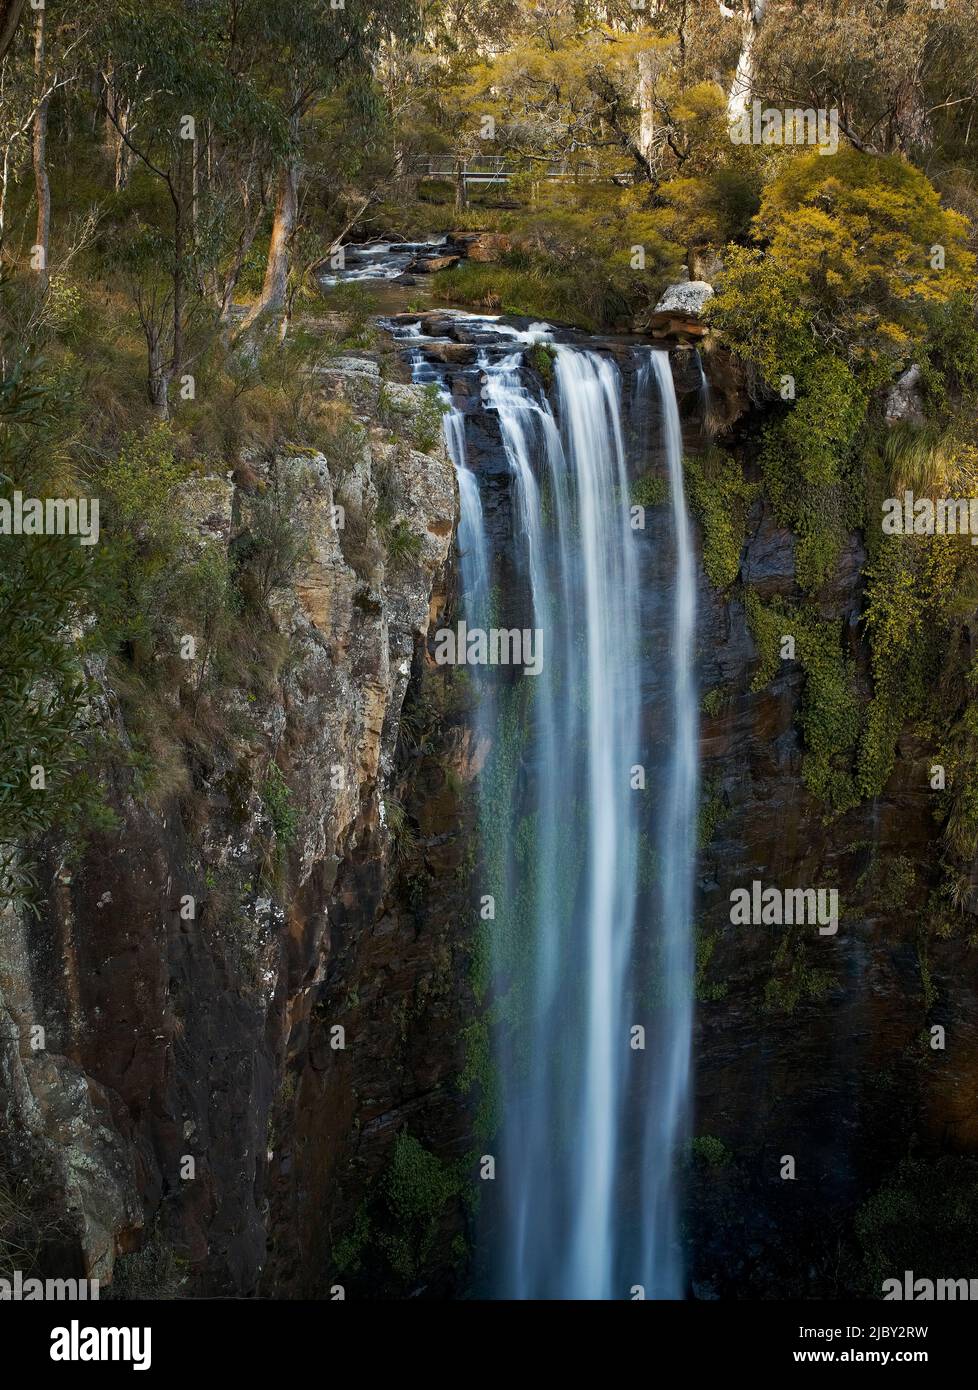 Looking from the top of Queen Mary Falls at the water flowing down rocky cliff face Stock Photo